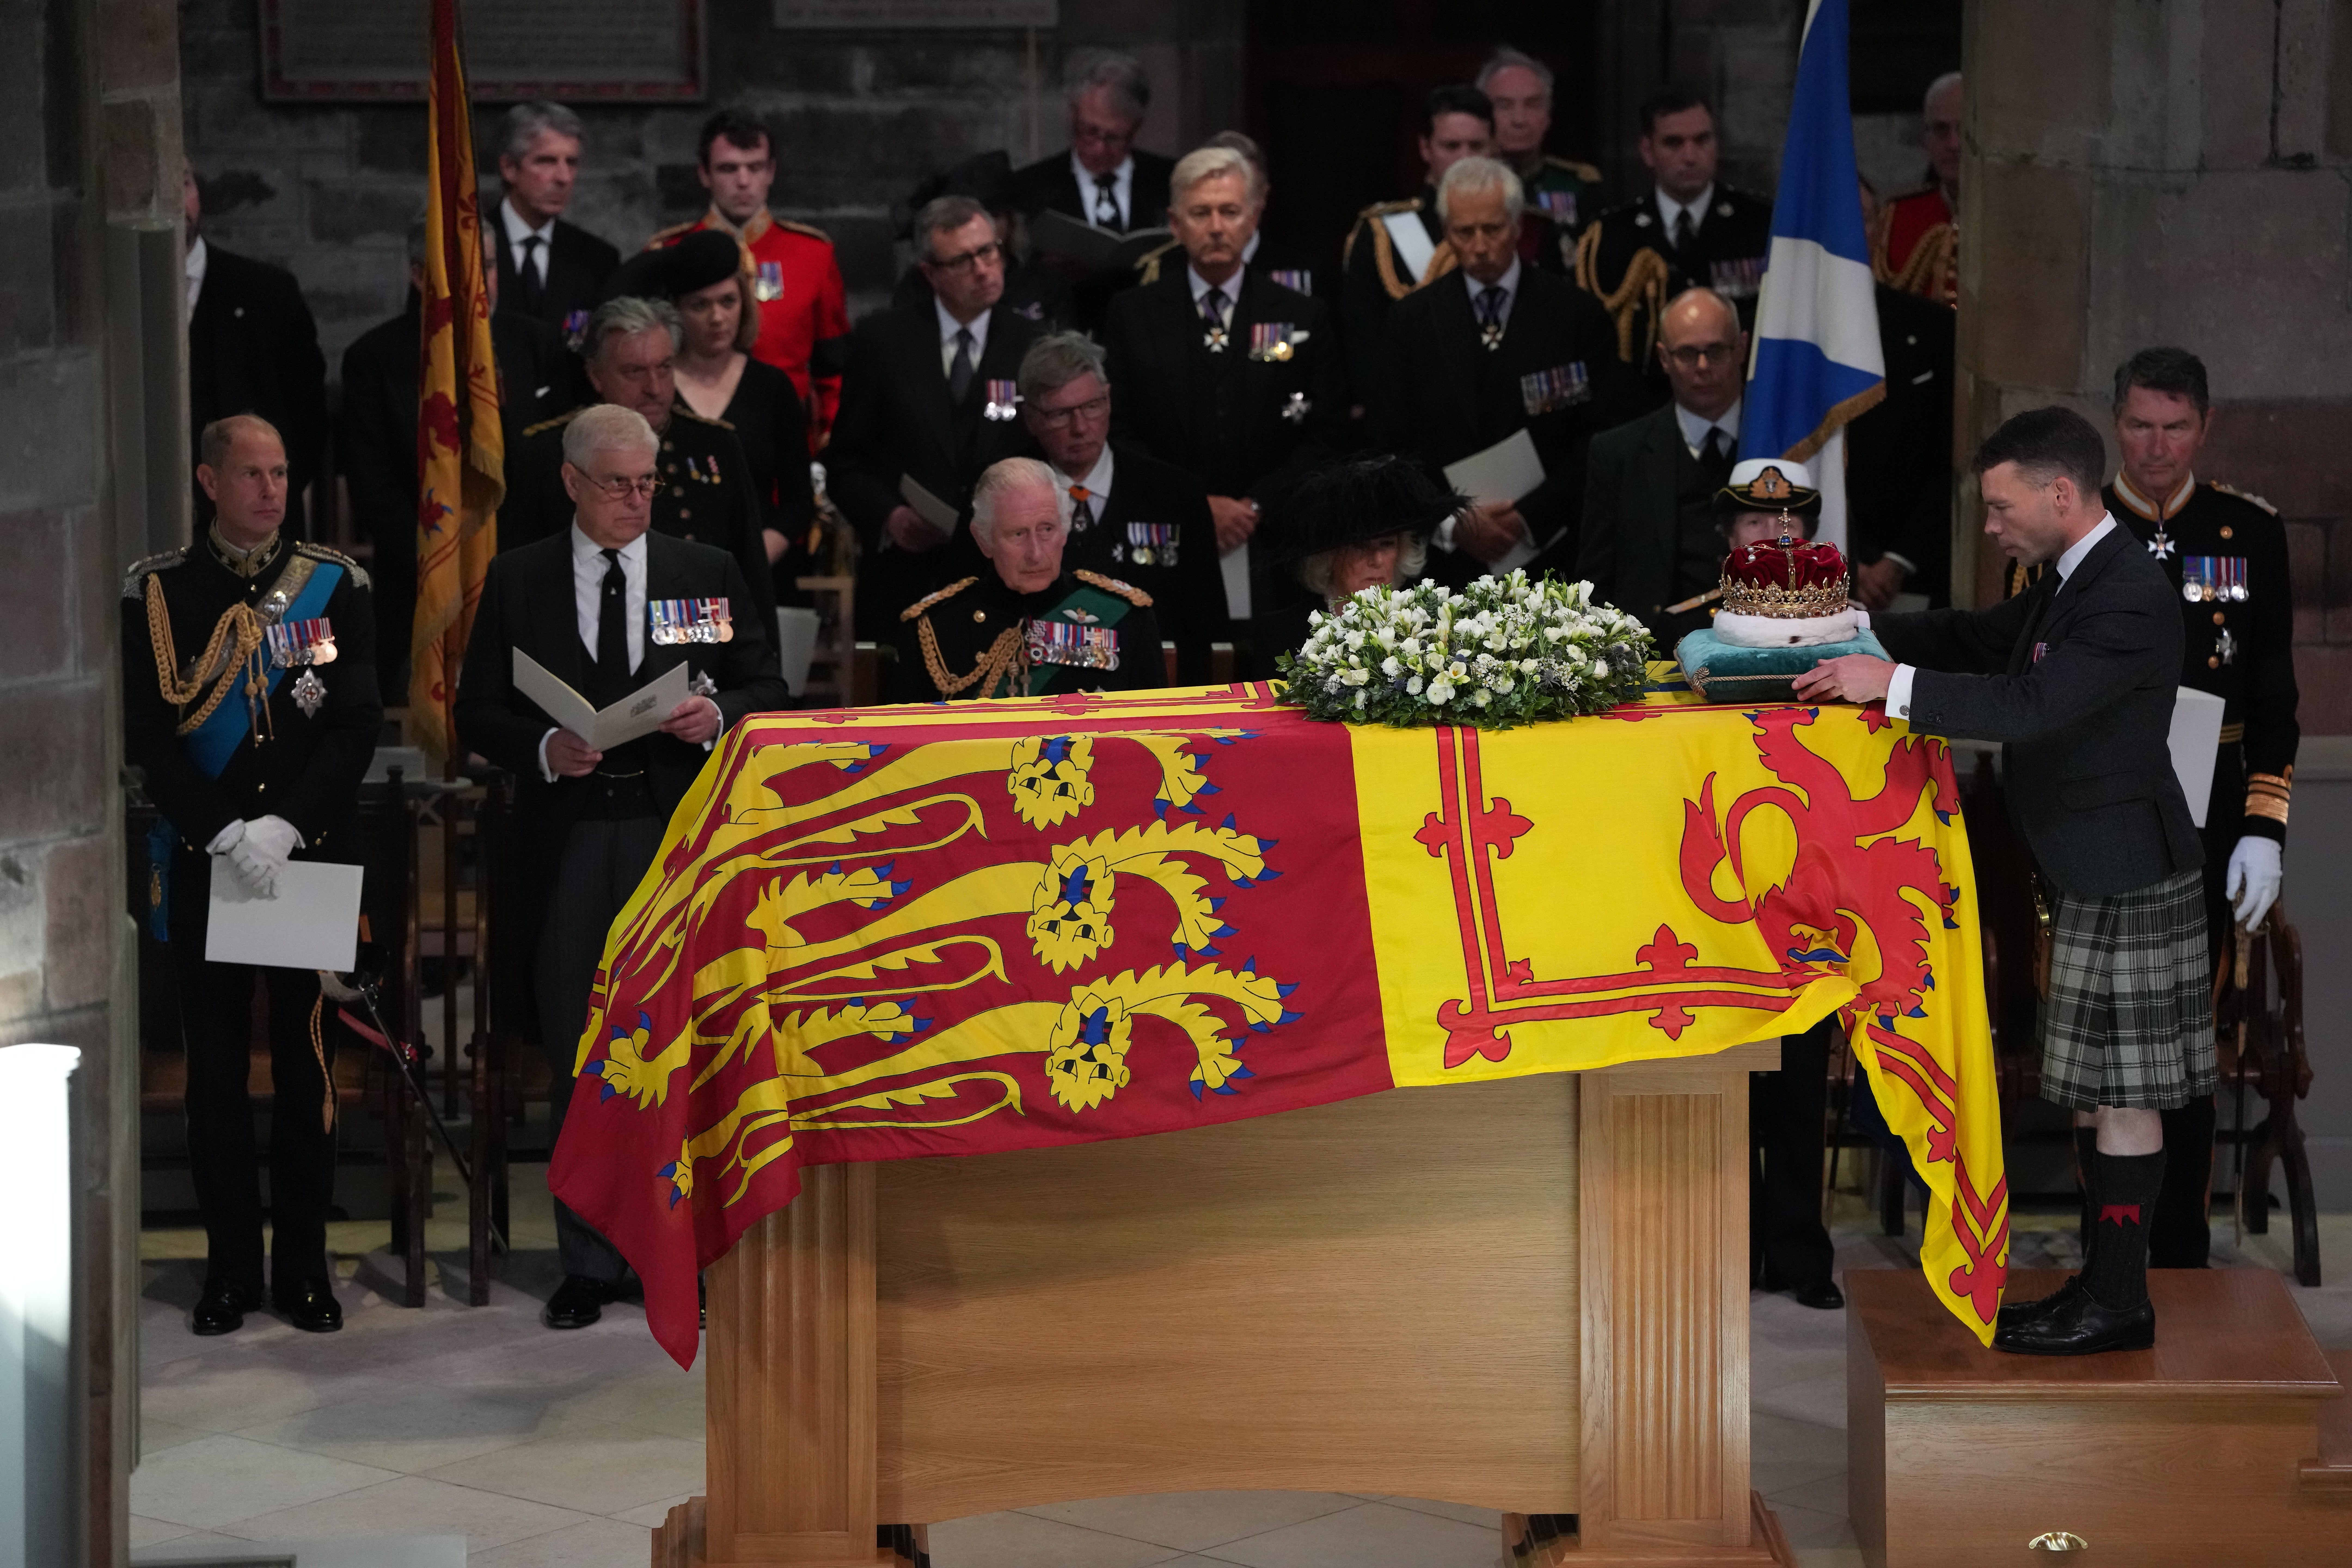 (left to right) the Earl of Wessex, the Duke of York, King Charles III, the Queen Consort, the Princess Royal and Vice Admiral Sir Tim Laurence, look on as the Duke of Hamilton places the Crown of Scotland on the coffin during the Service of Prayer and Reflection for the Life of Queen Elizabeth II at St Giles’ Cathedral, Edinburgh. Picture date: Monday September 12, 2022.